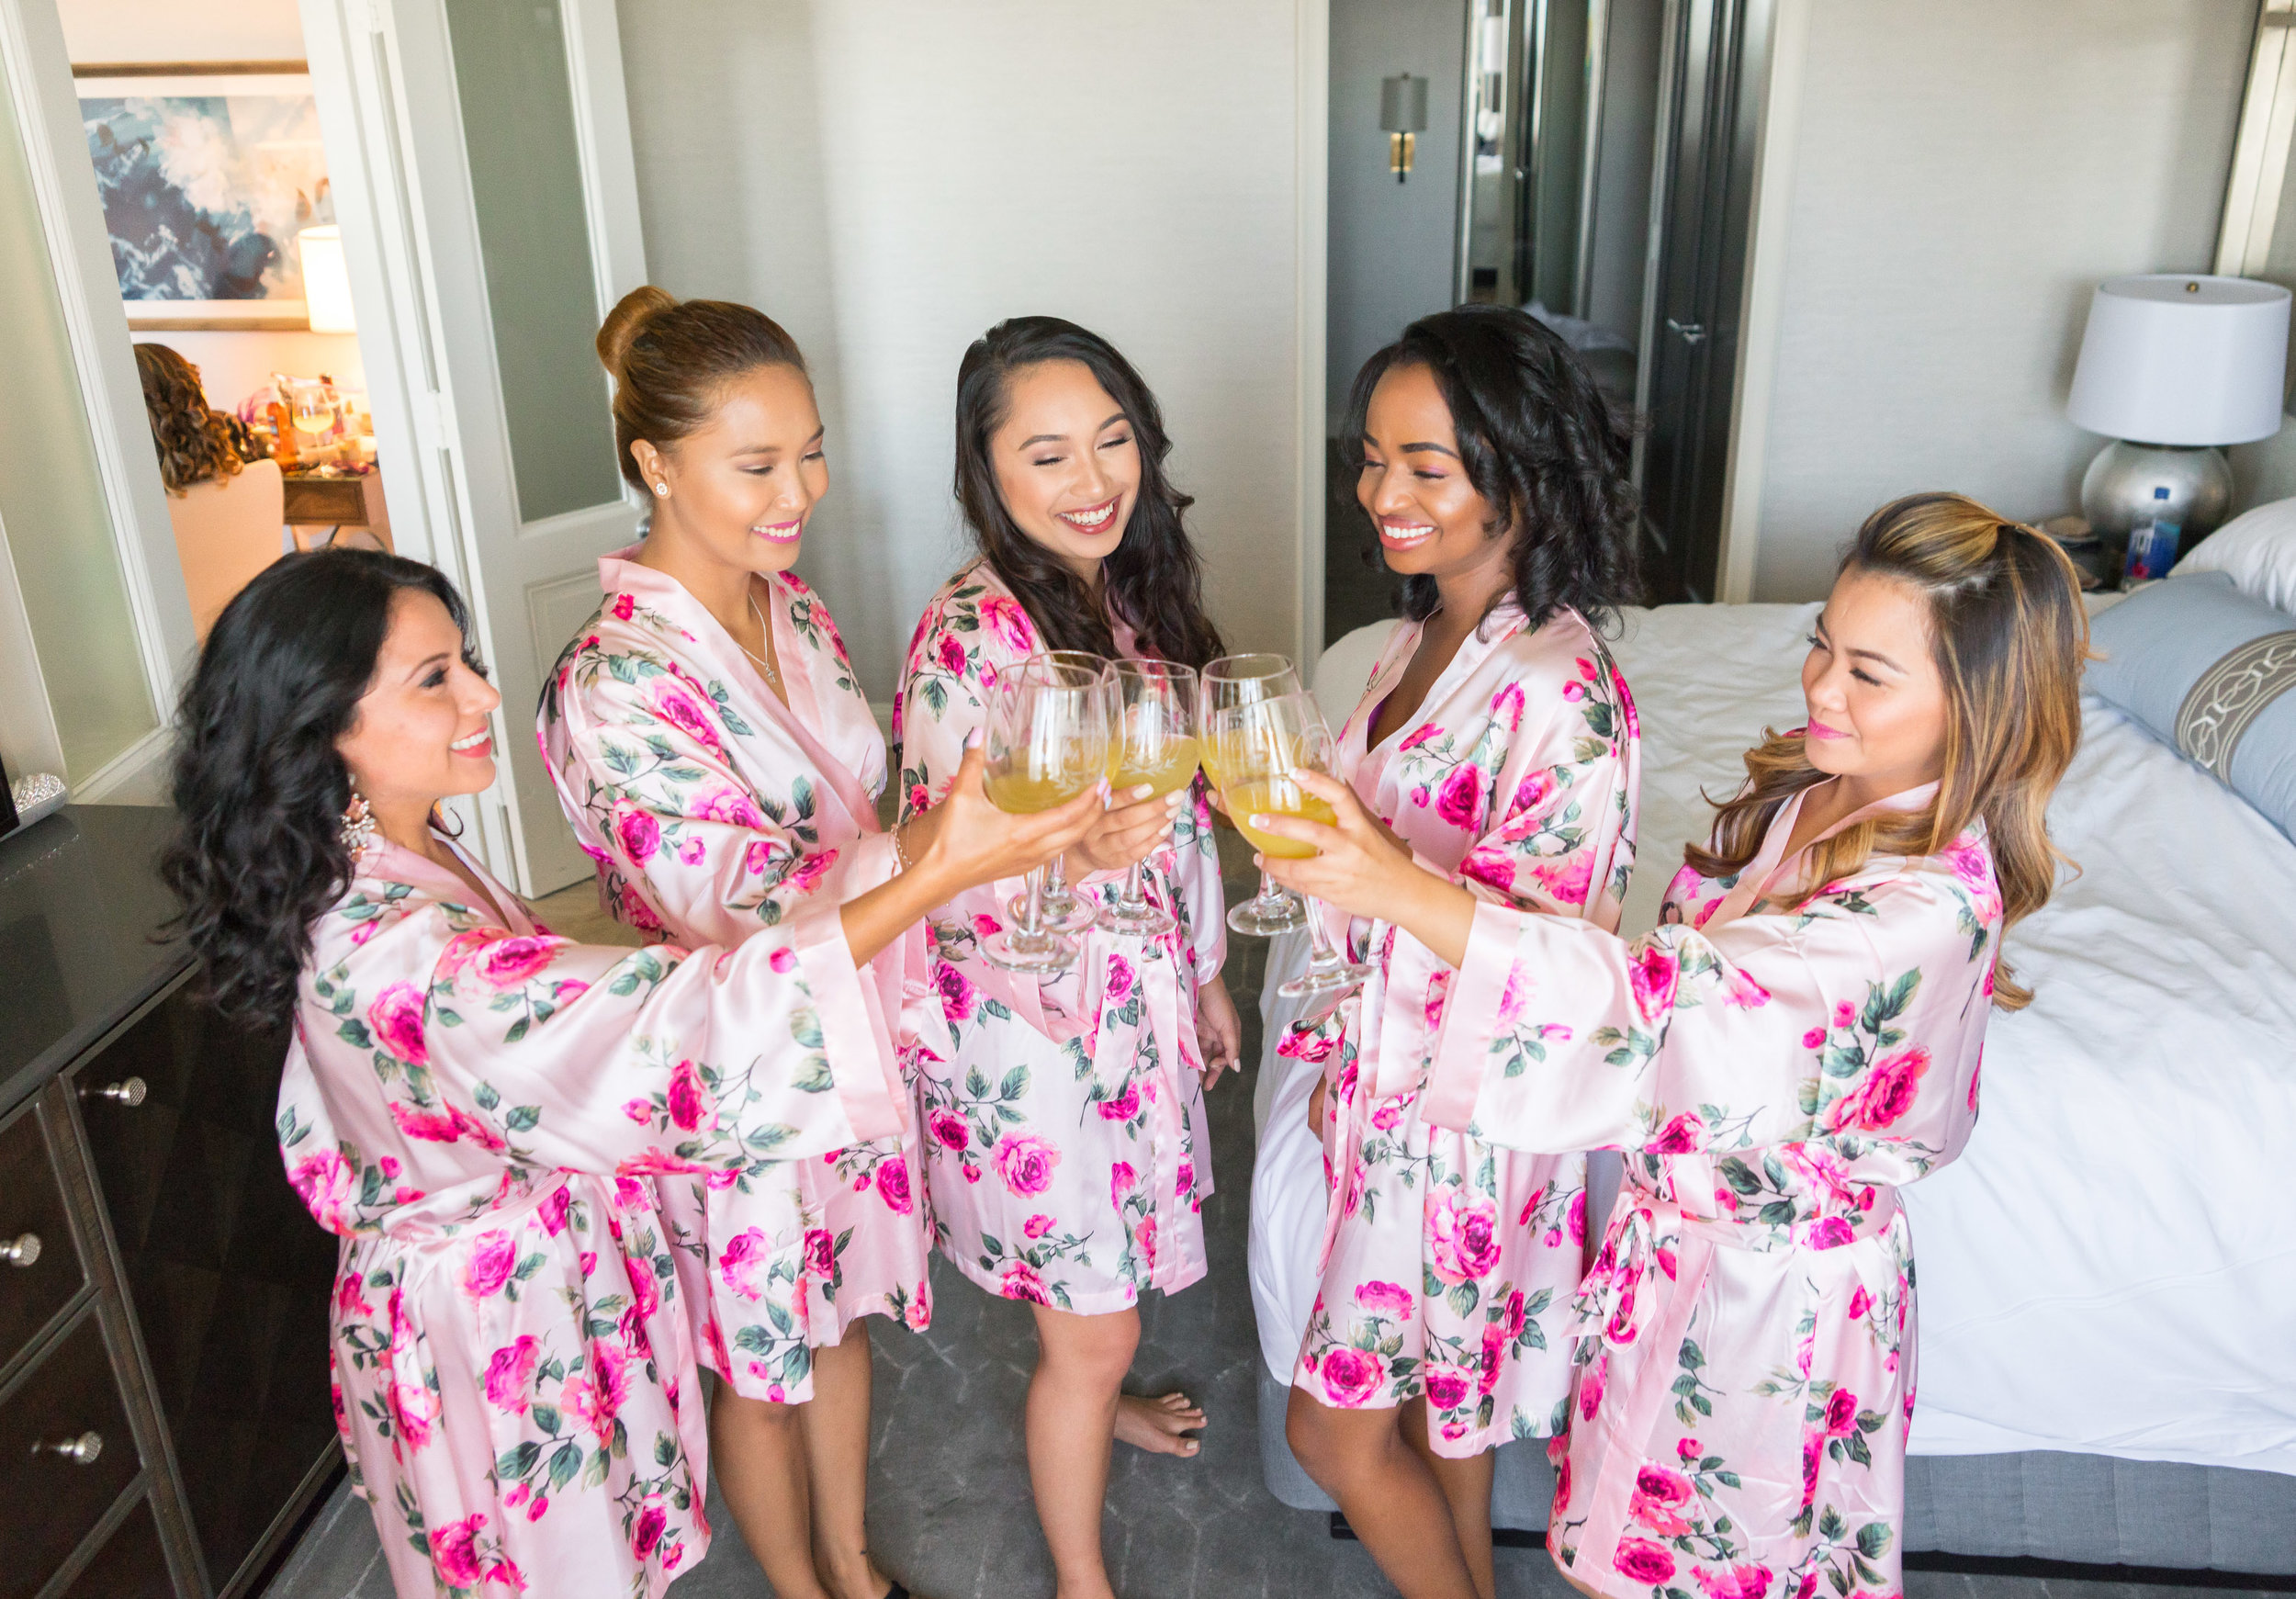 Bridesmaids in matching floral robes 